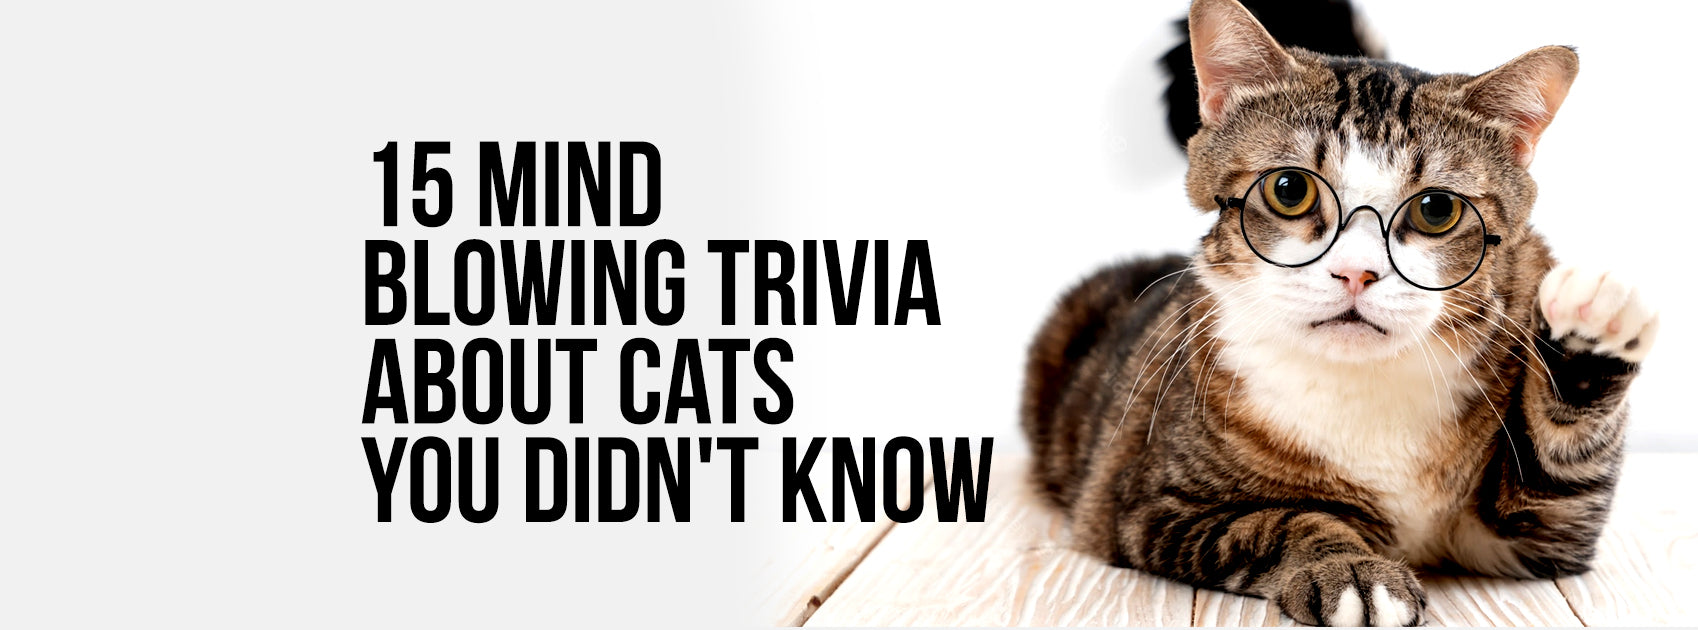 15 Mind Blowing Trivia About Cats You Didn't Know